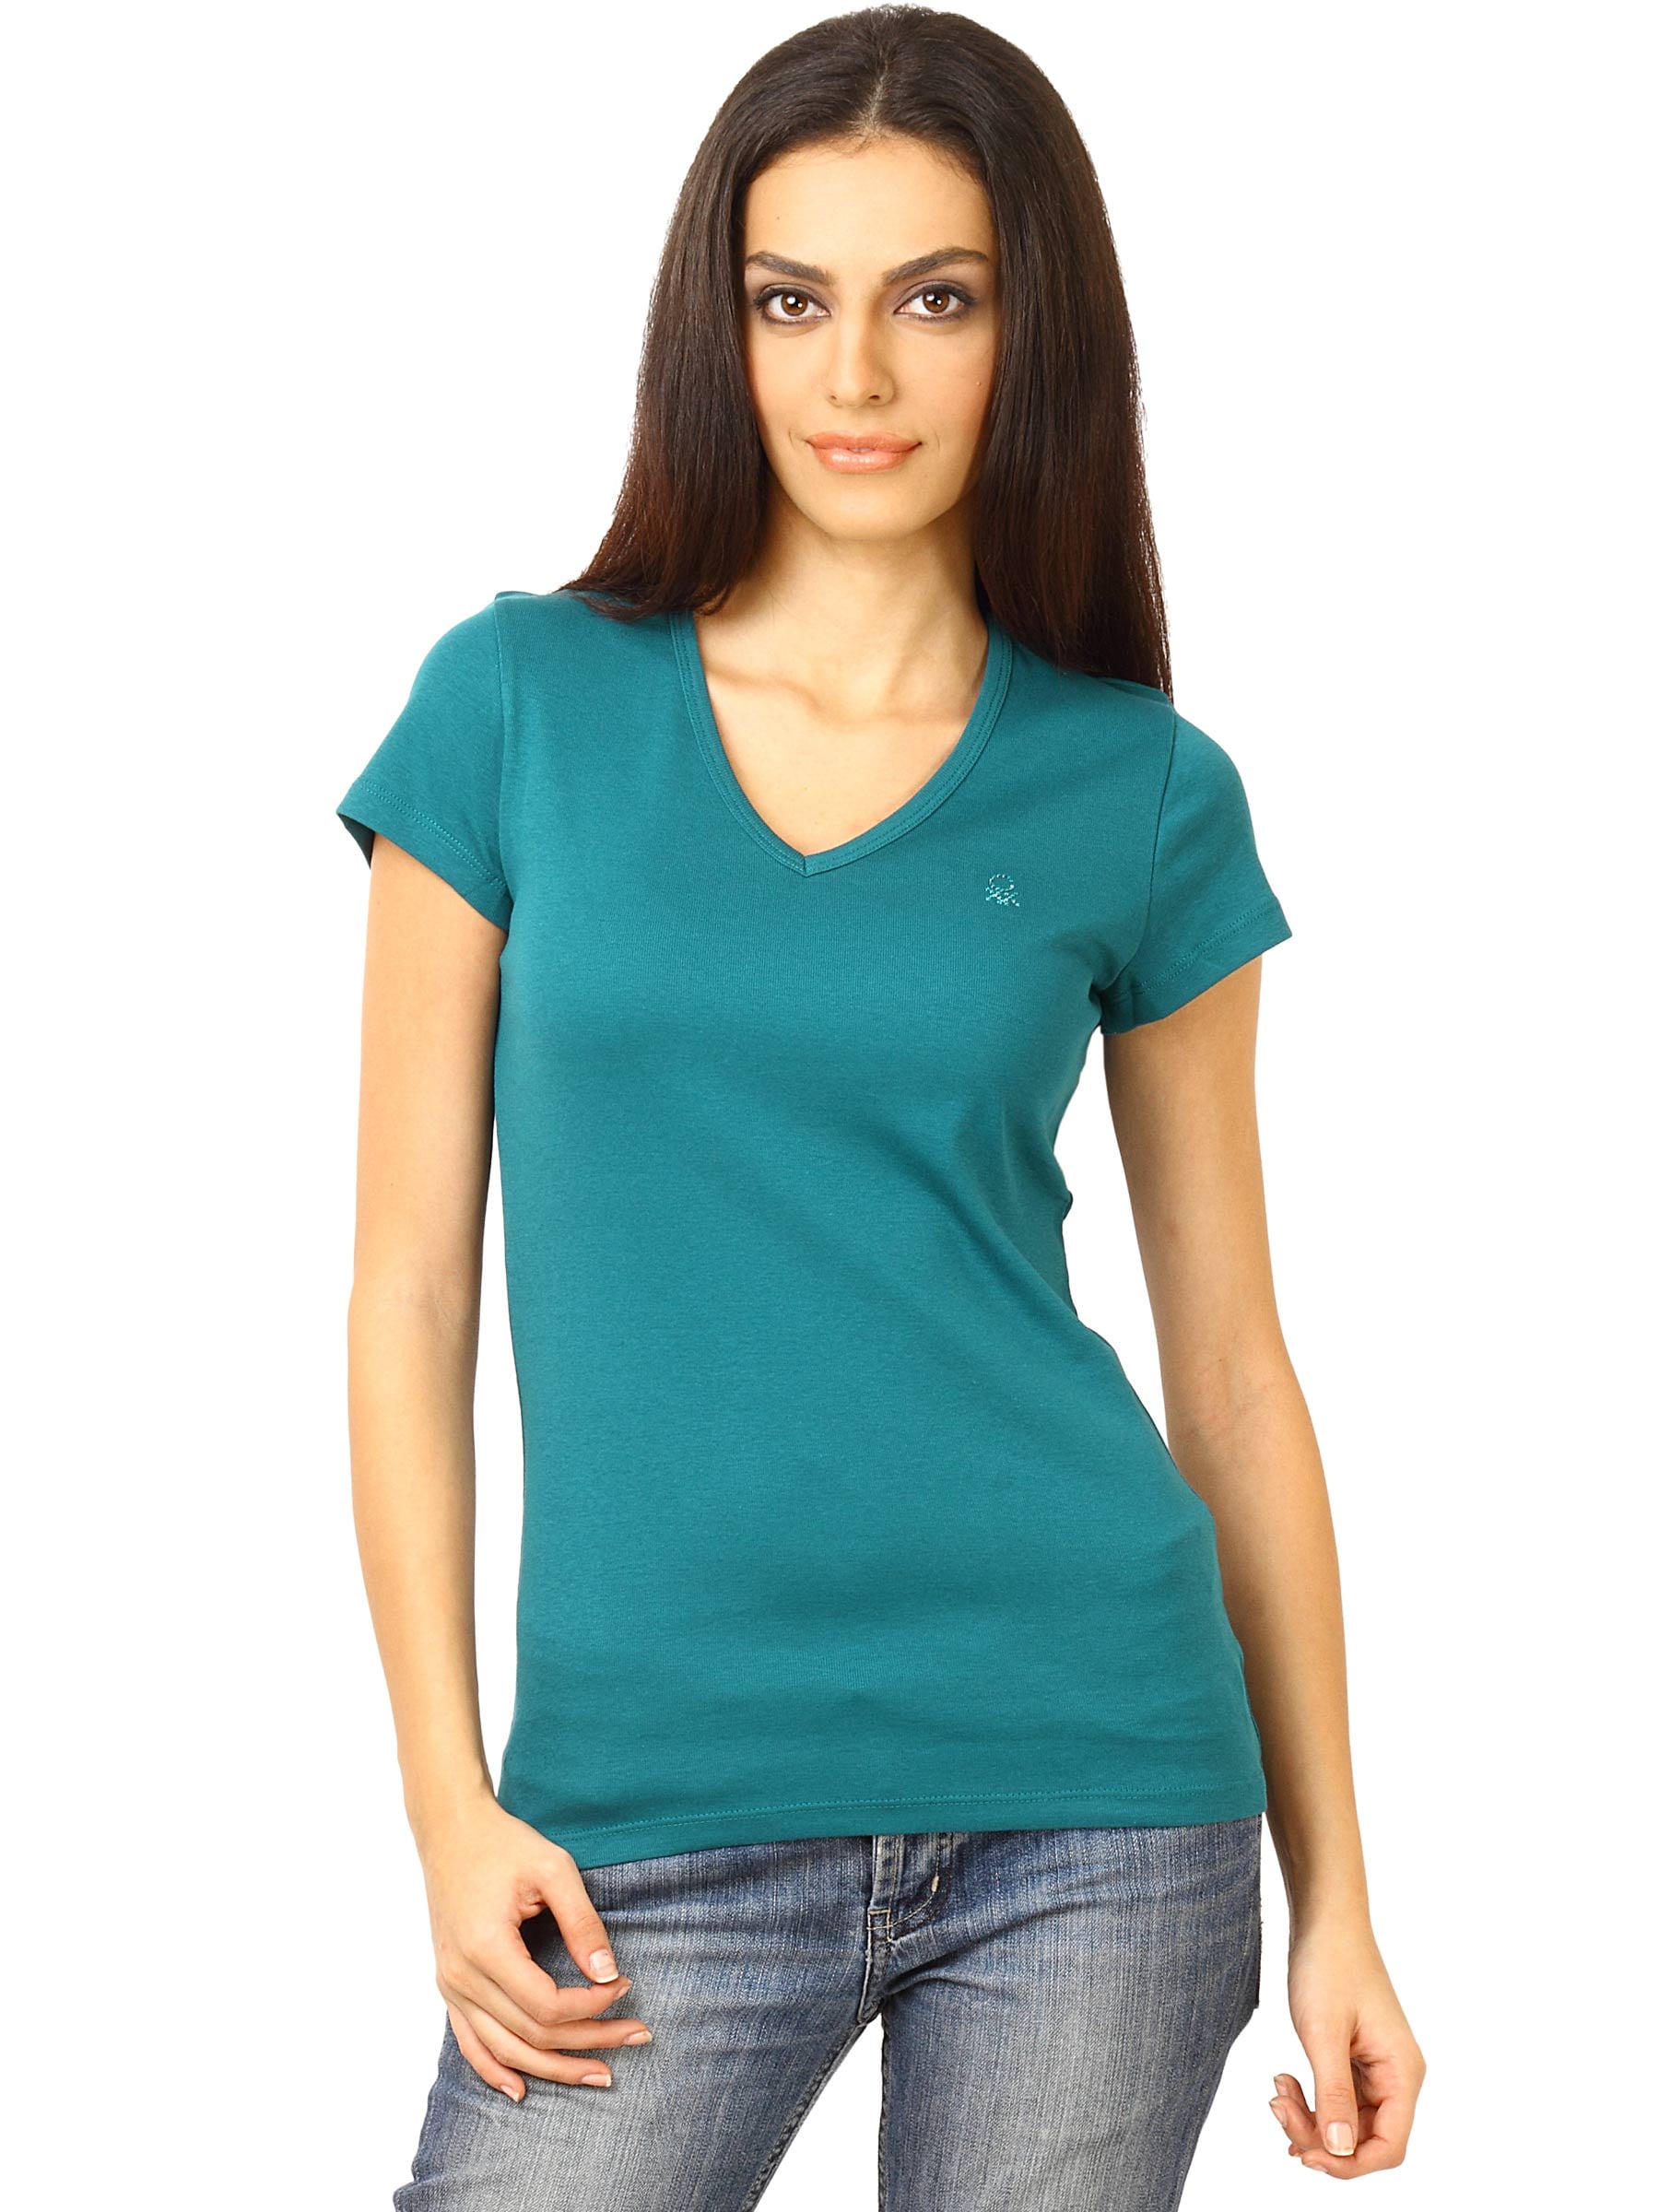 United Colors of Benetton Women Solid Green T-shirt